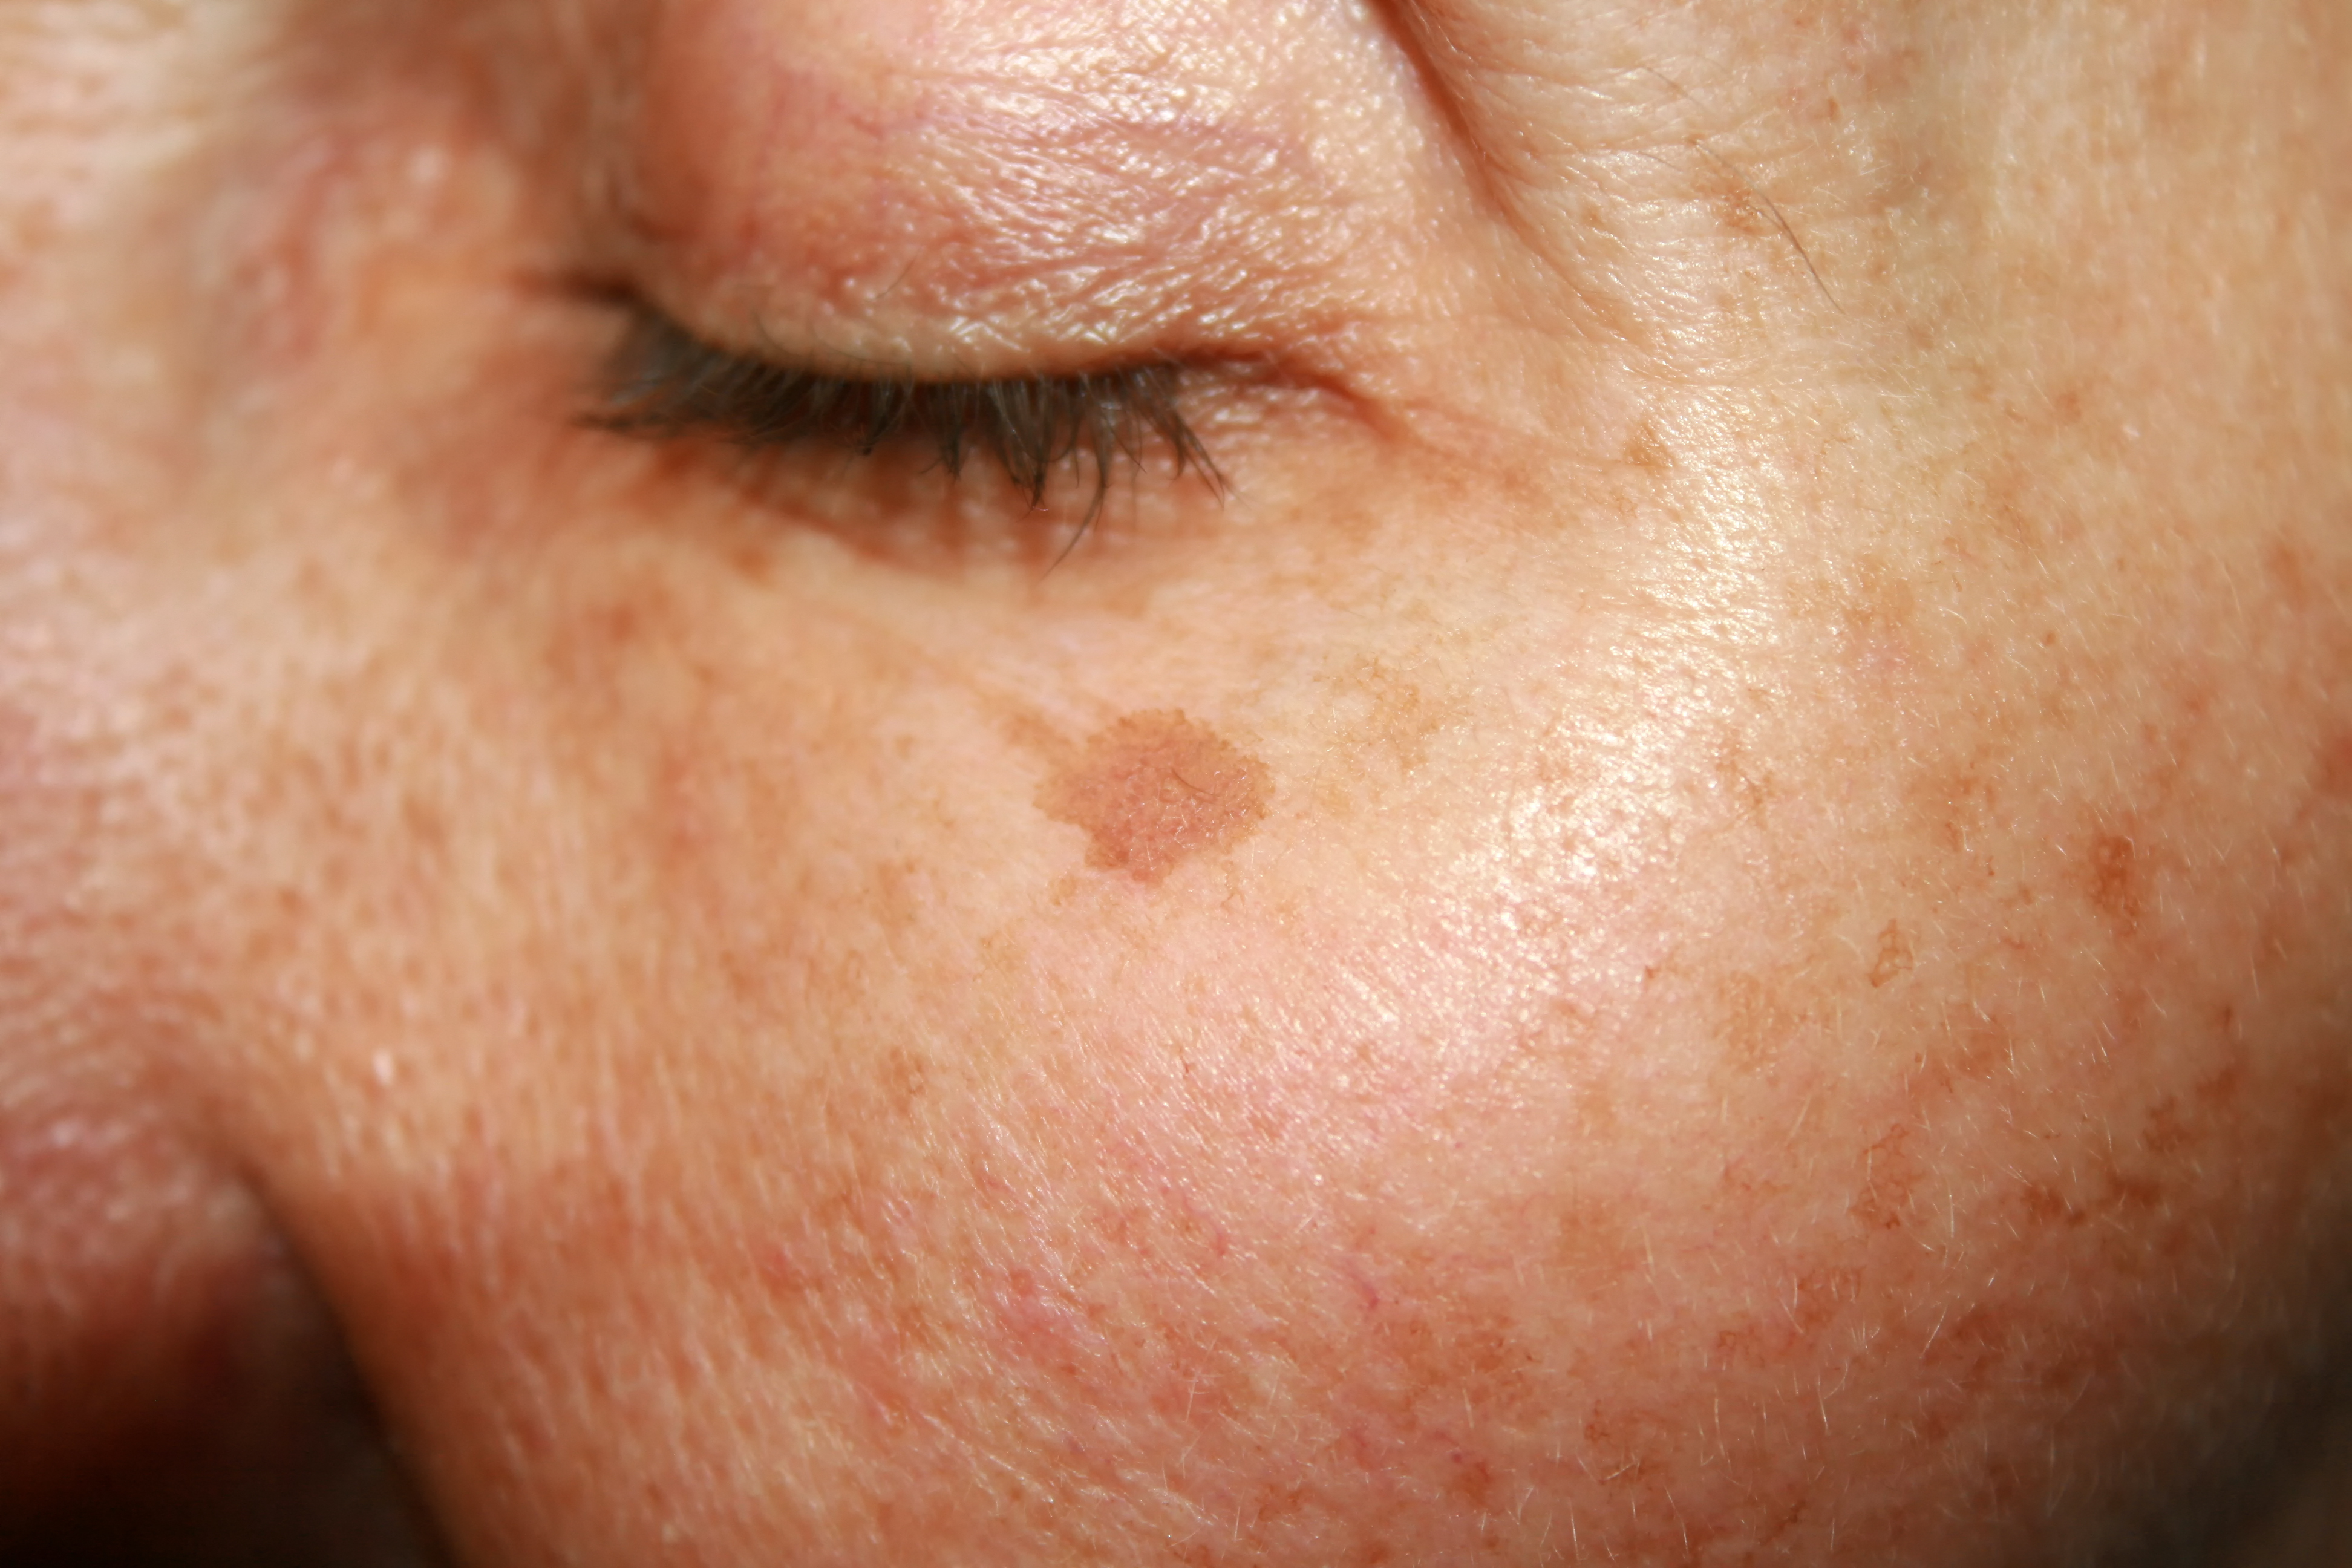 closed eye with an age spot, healthy skin after 40